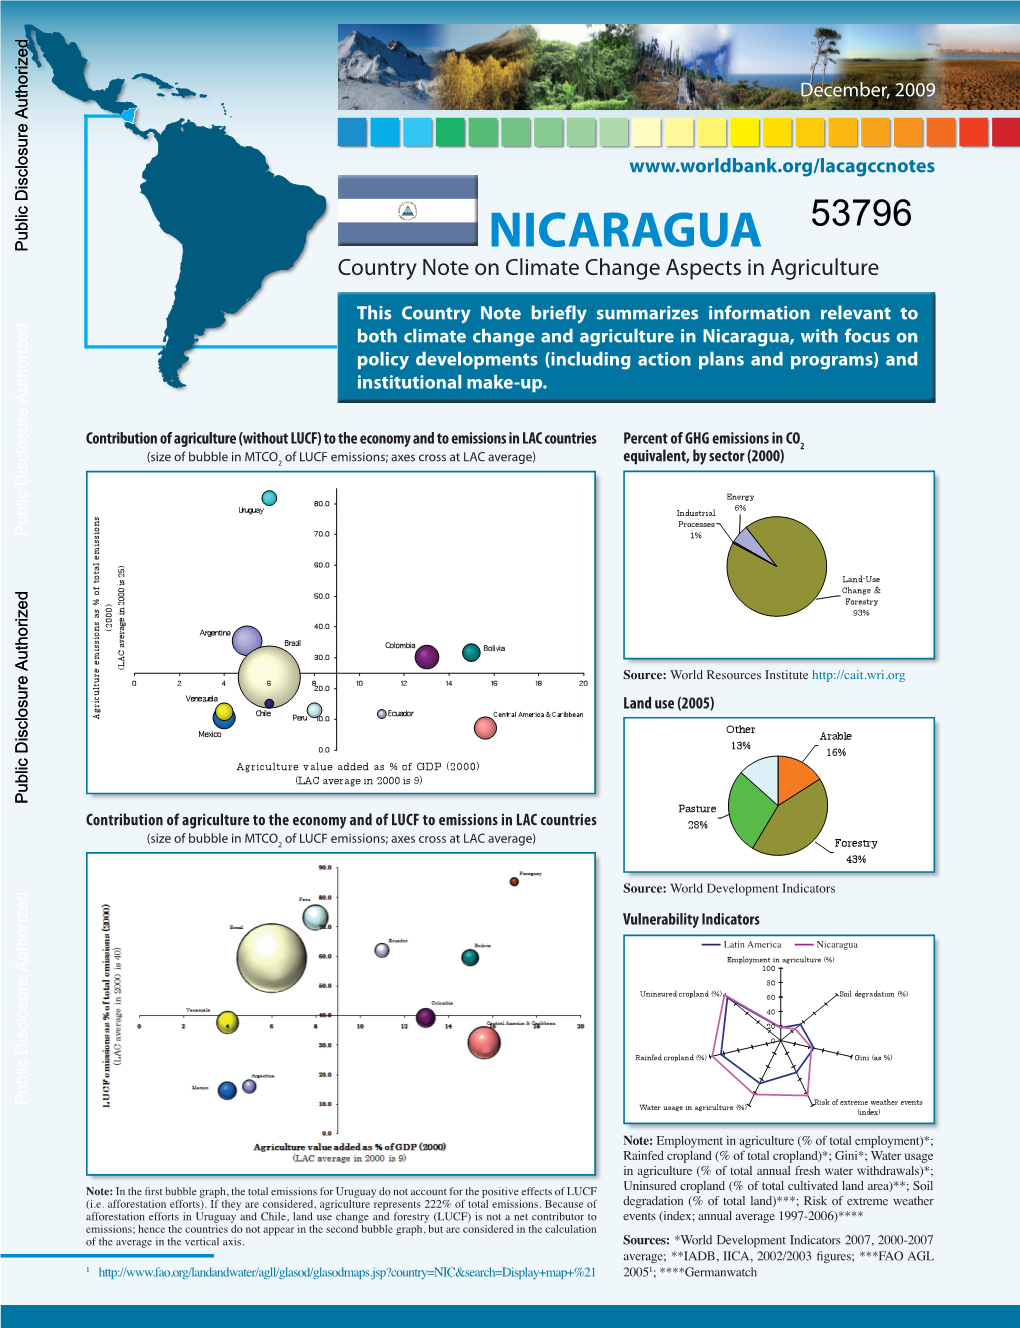 NICARAGUA Country Note on Climate Change Aspects in Agriculture